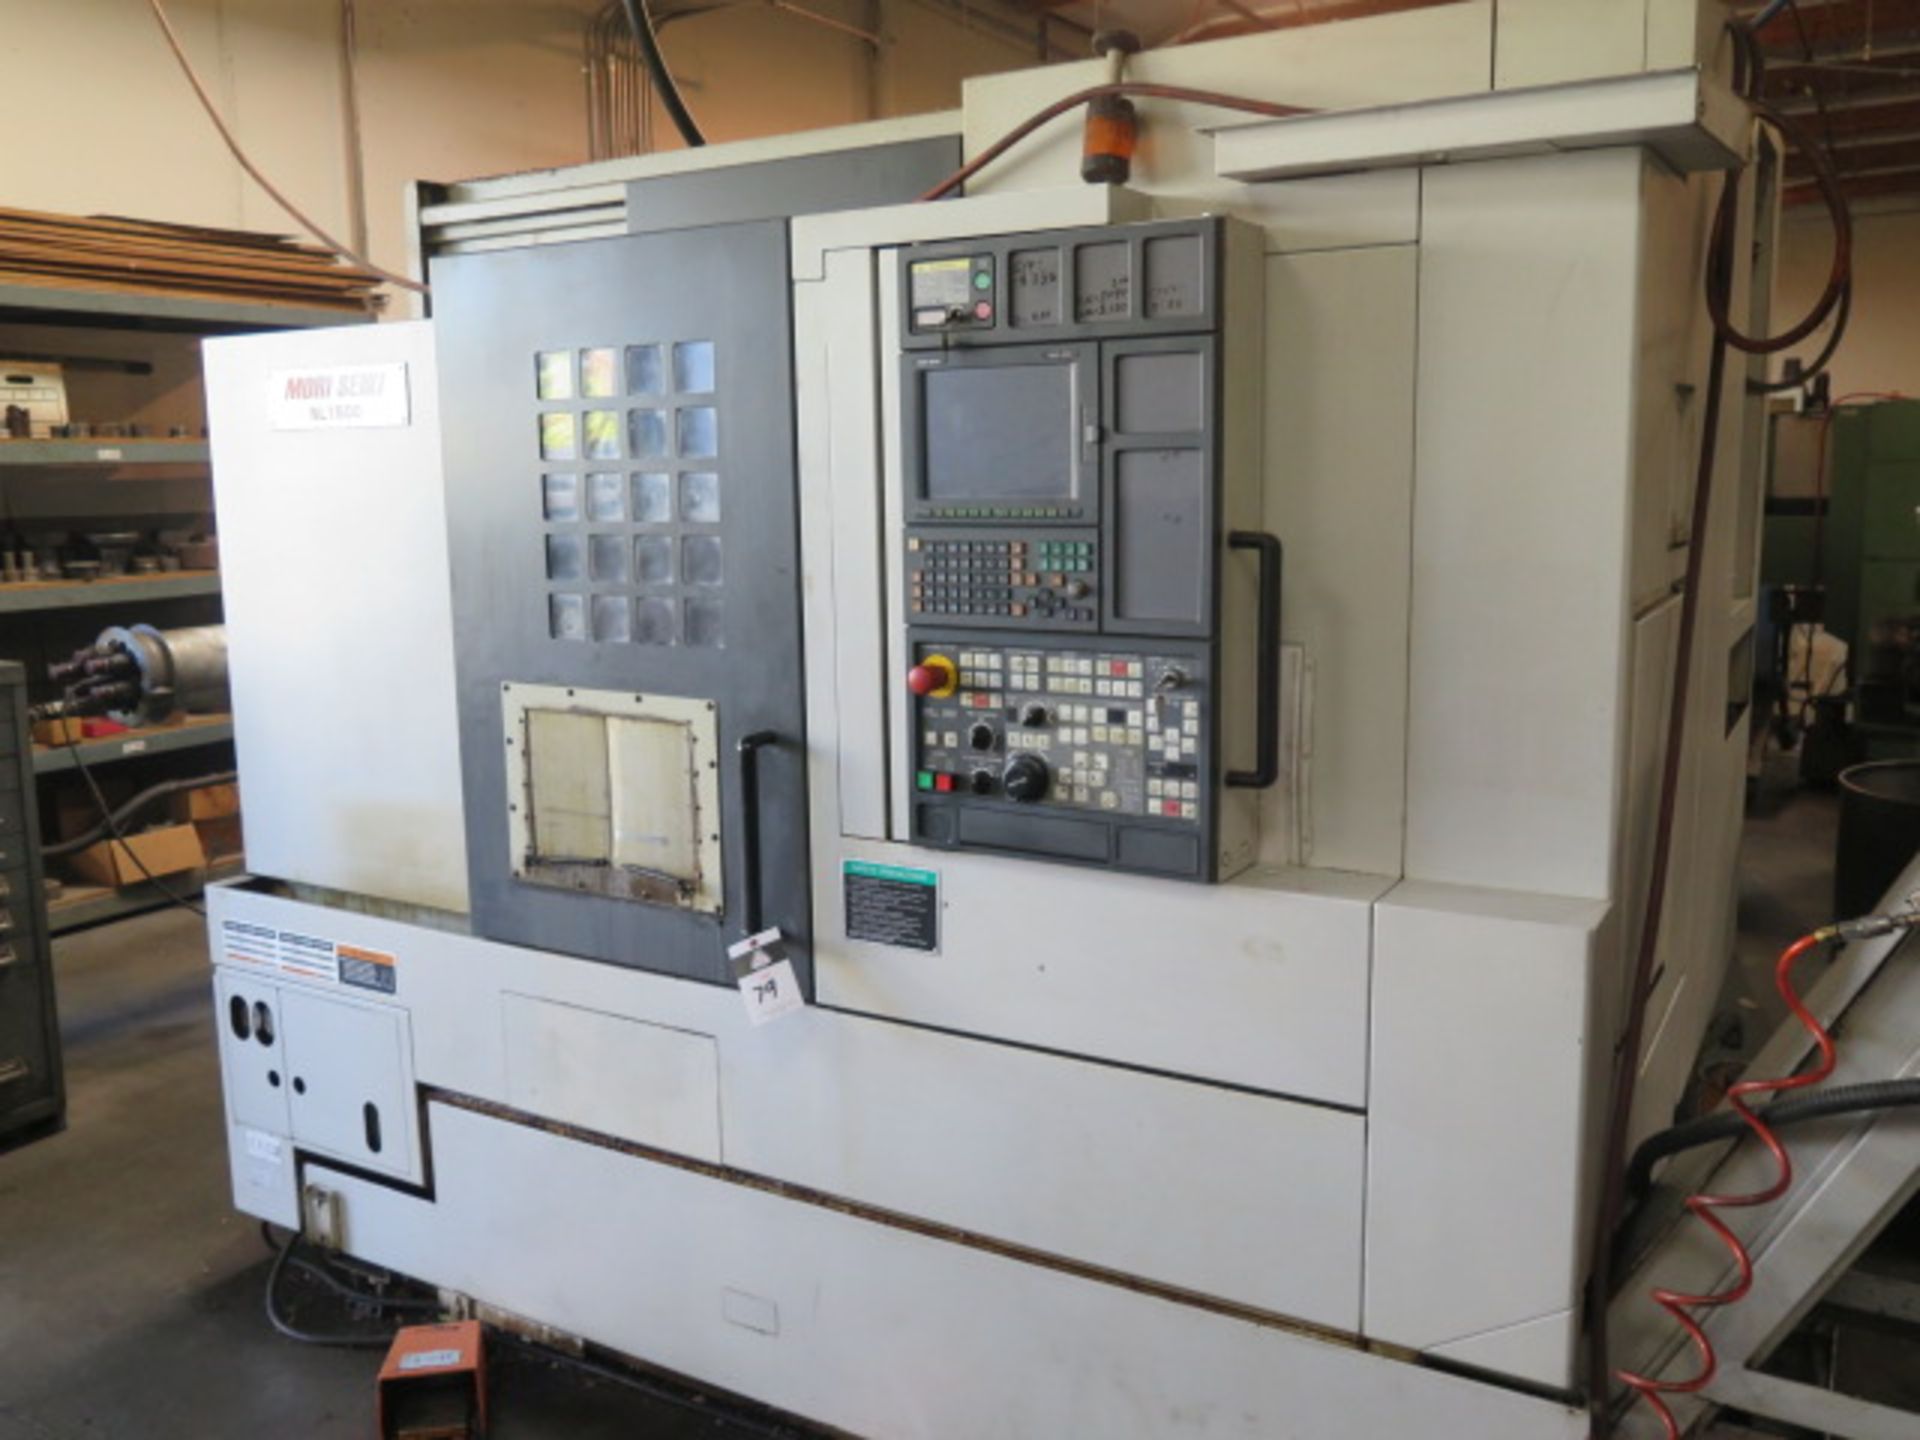 2005 Mori Seiki NL1500 S/500 Twin Spindle CNC Turning Center s/n NL151E01356, SOLD AS IS - Image 3 of 17